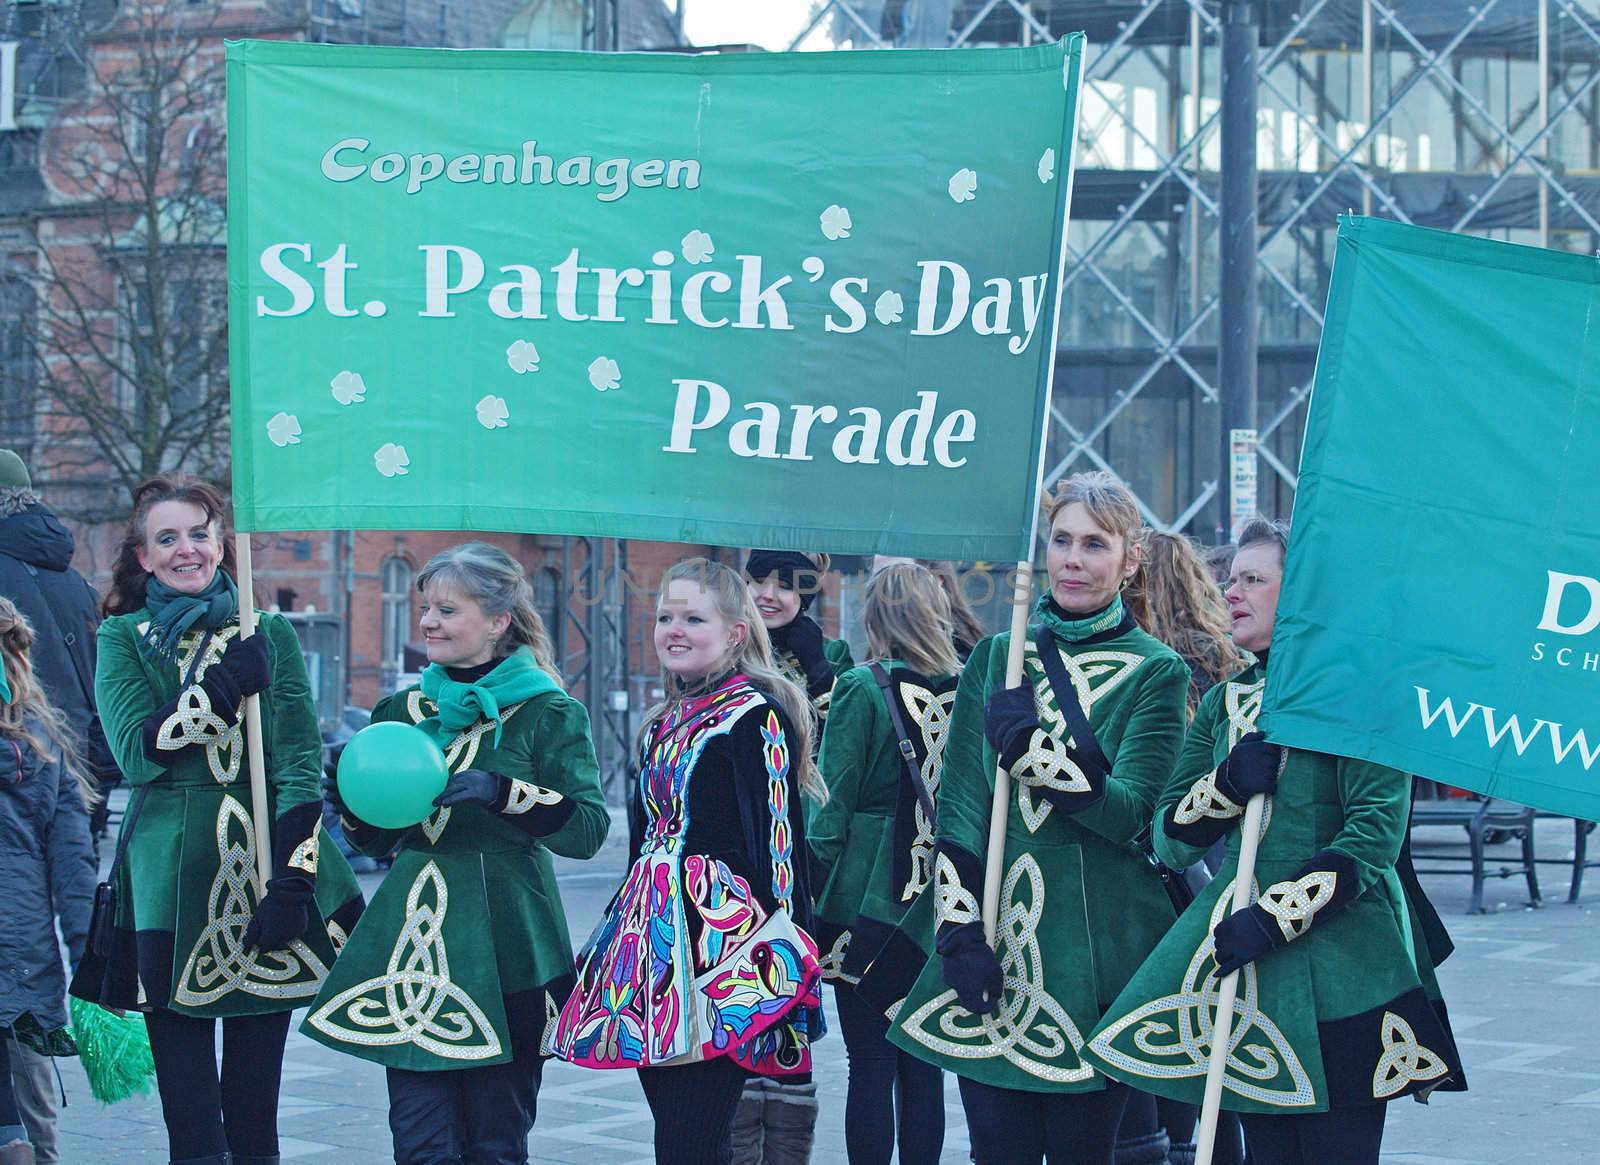 COPENHAGEN - MAR 17: Participants at the annual St. Patrick's Day celebration and parade in front of Copenhagen City Hall, Denmark on March 17, 2013.